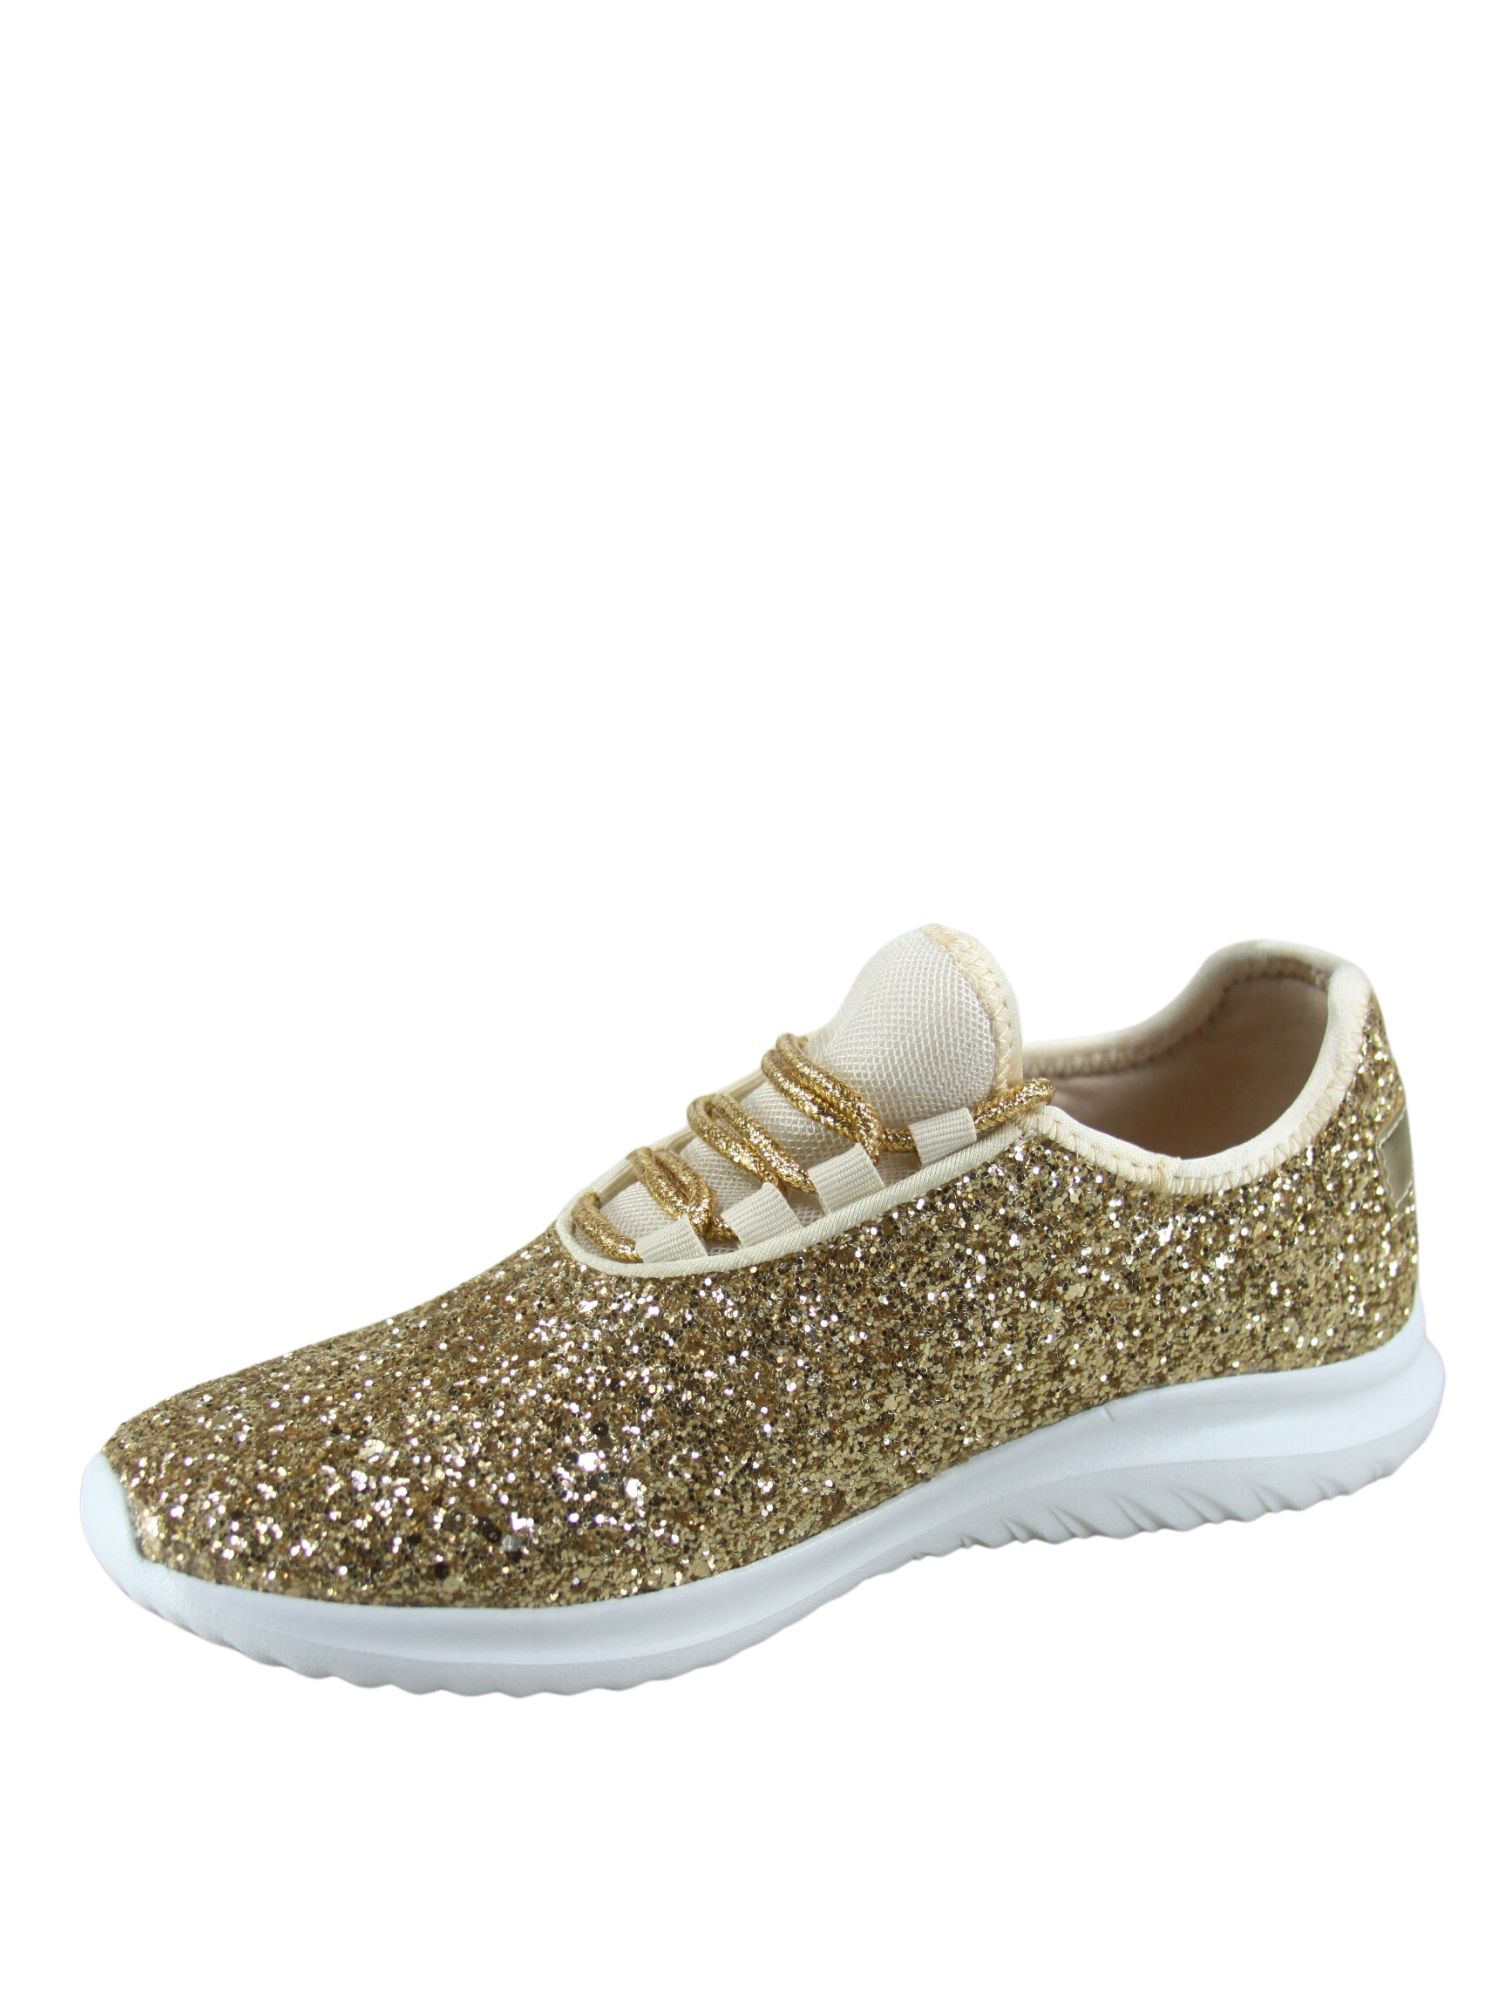 Toozon Women's Fashion Glitter Sneakers for Lace Silp On Running Shoes Lightweight Tennis Walking Sneakers